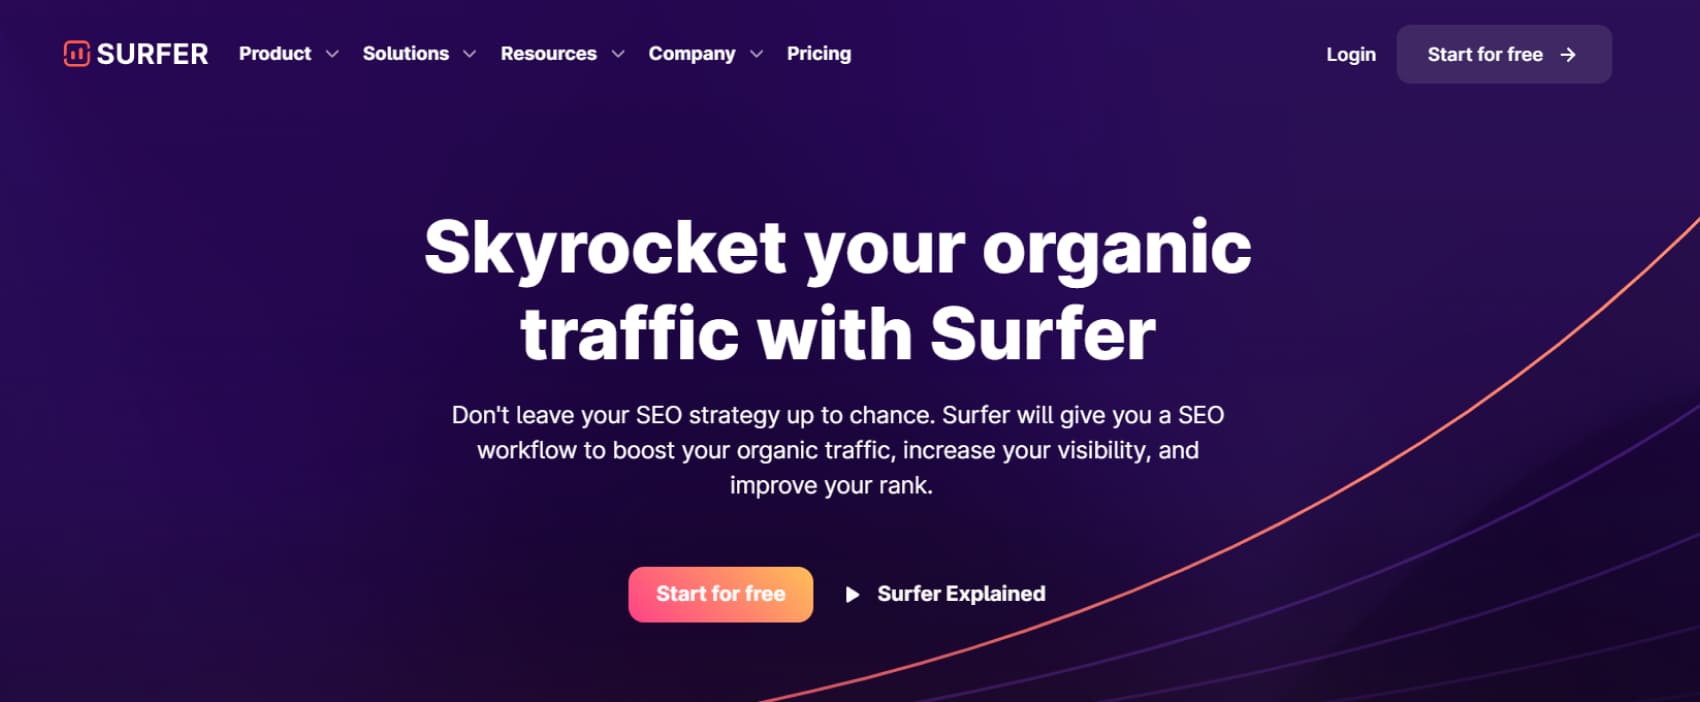 Surfer is one of the top inbound marketing tools